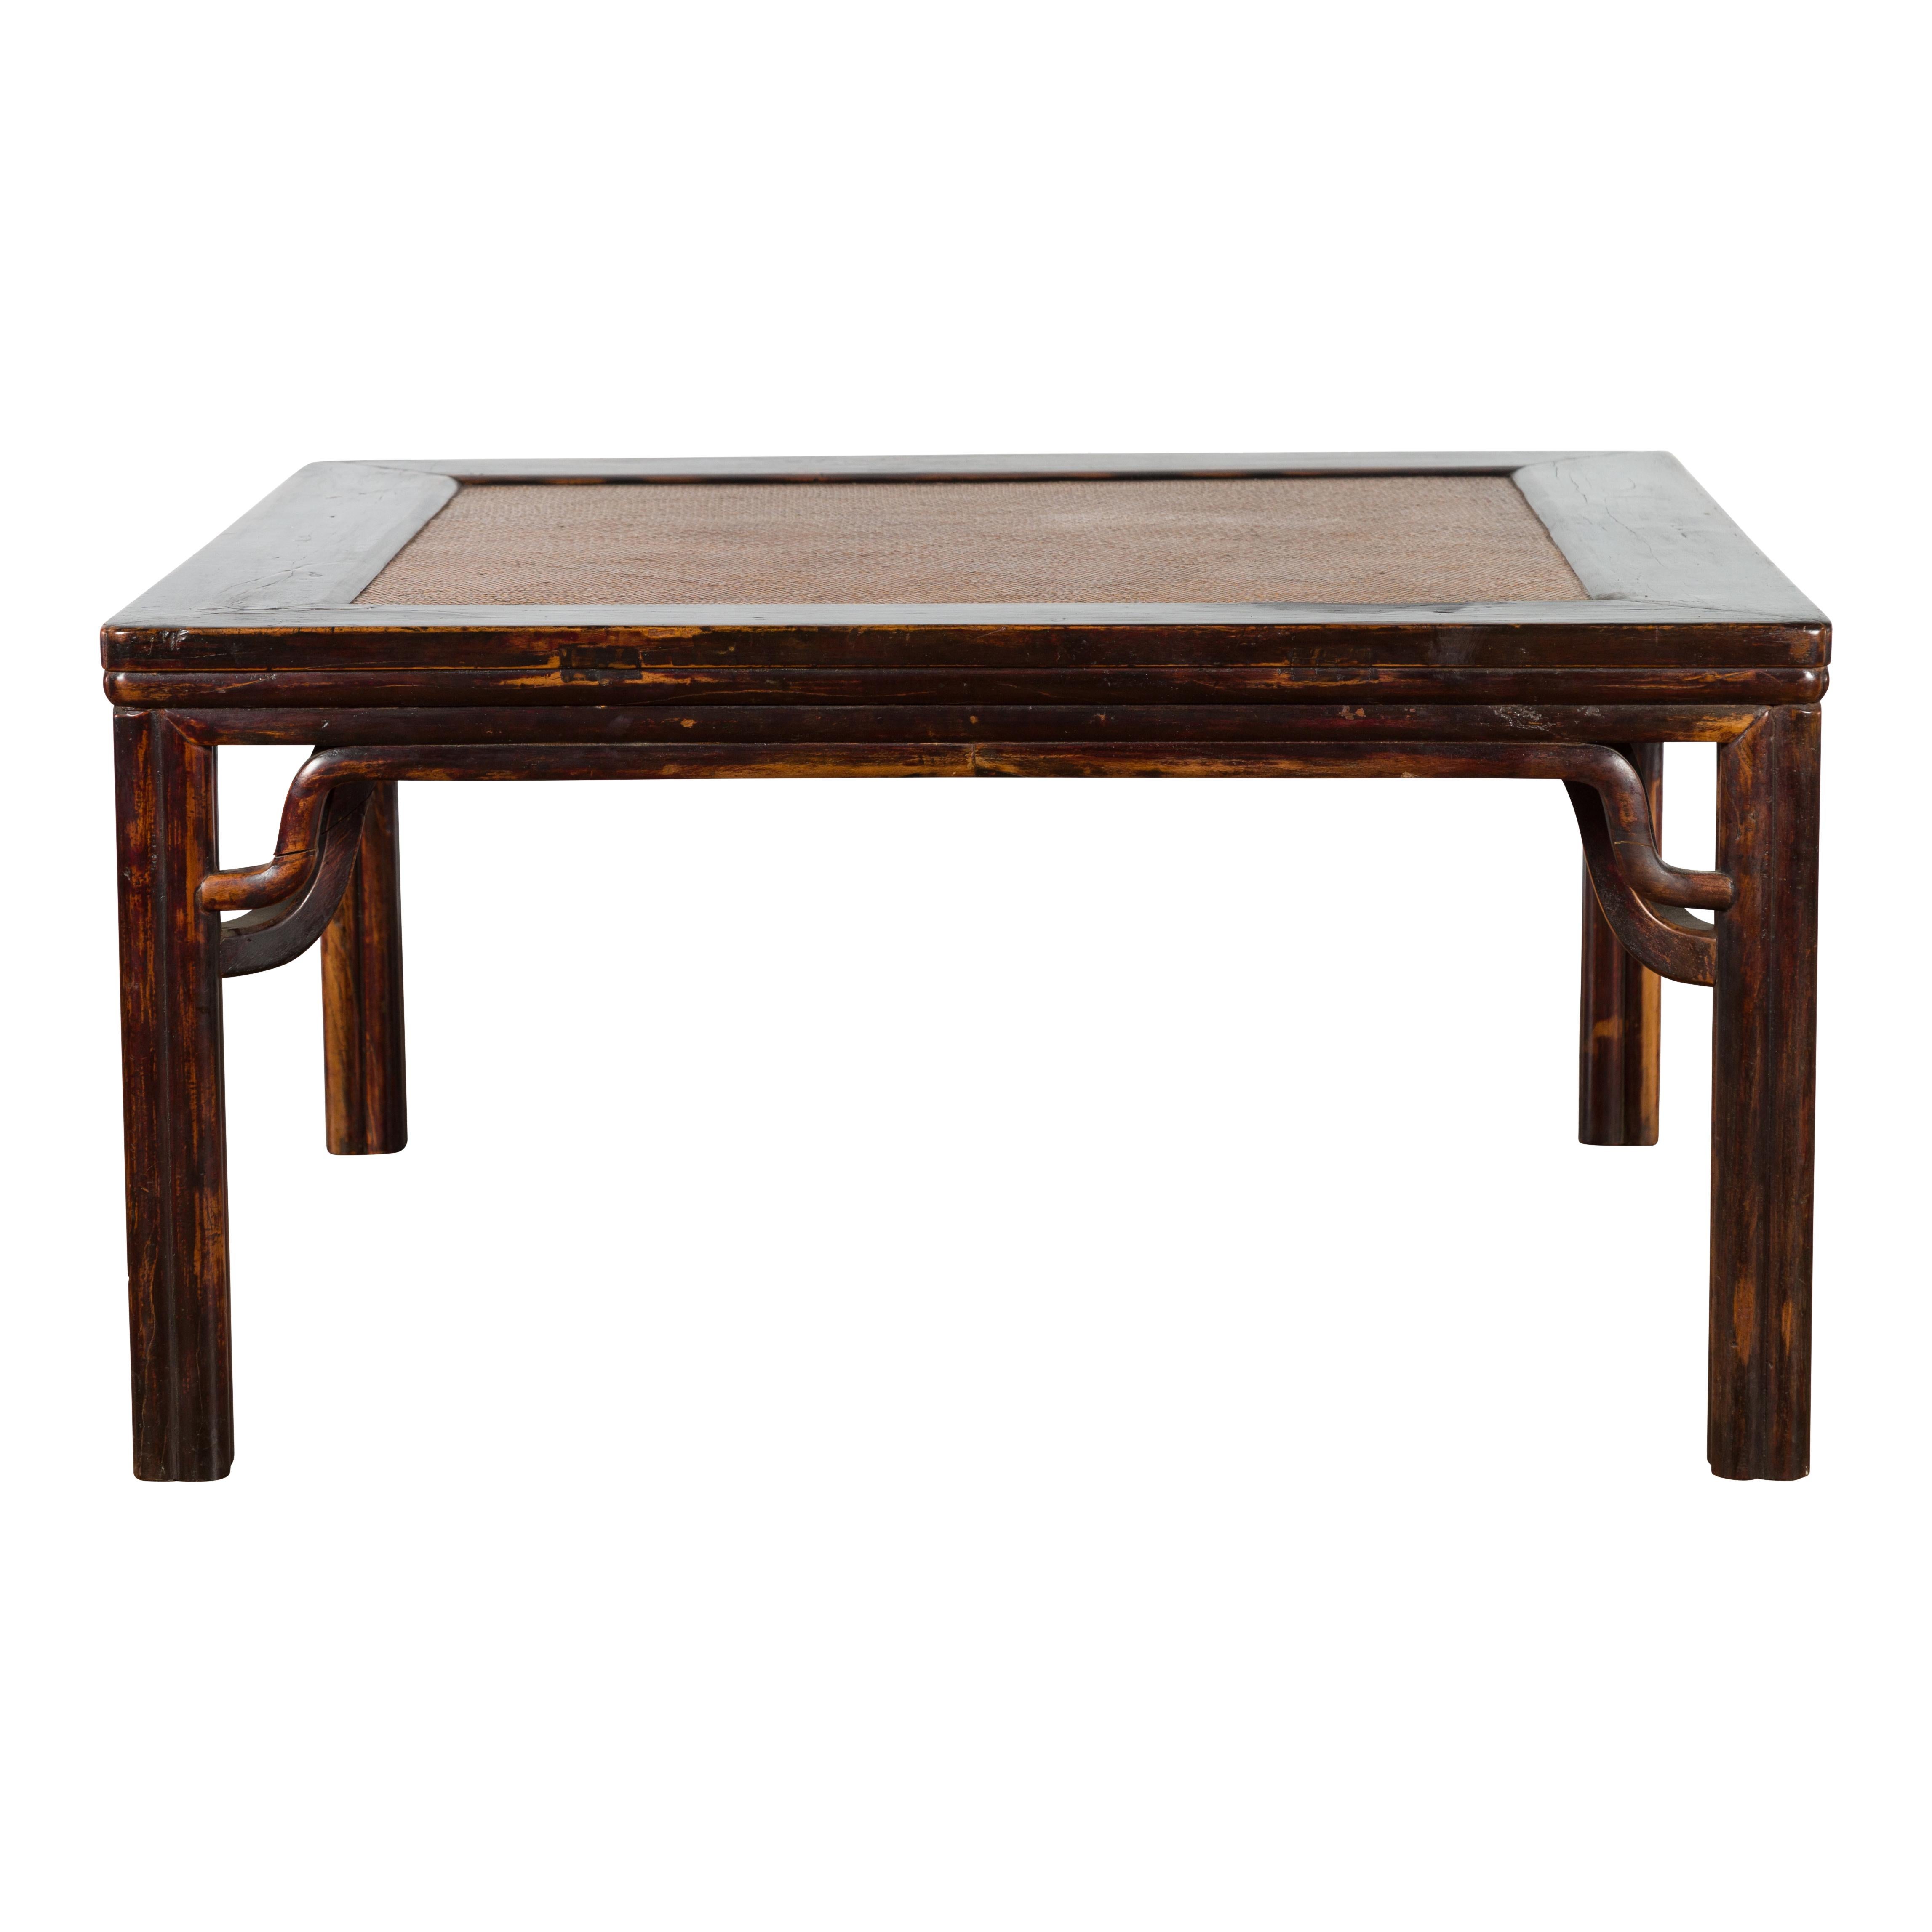 Chinese Ming Dynasty Style Wooden Coffee Table with Hand-Woven Rattan Top For Sale 12